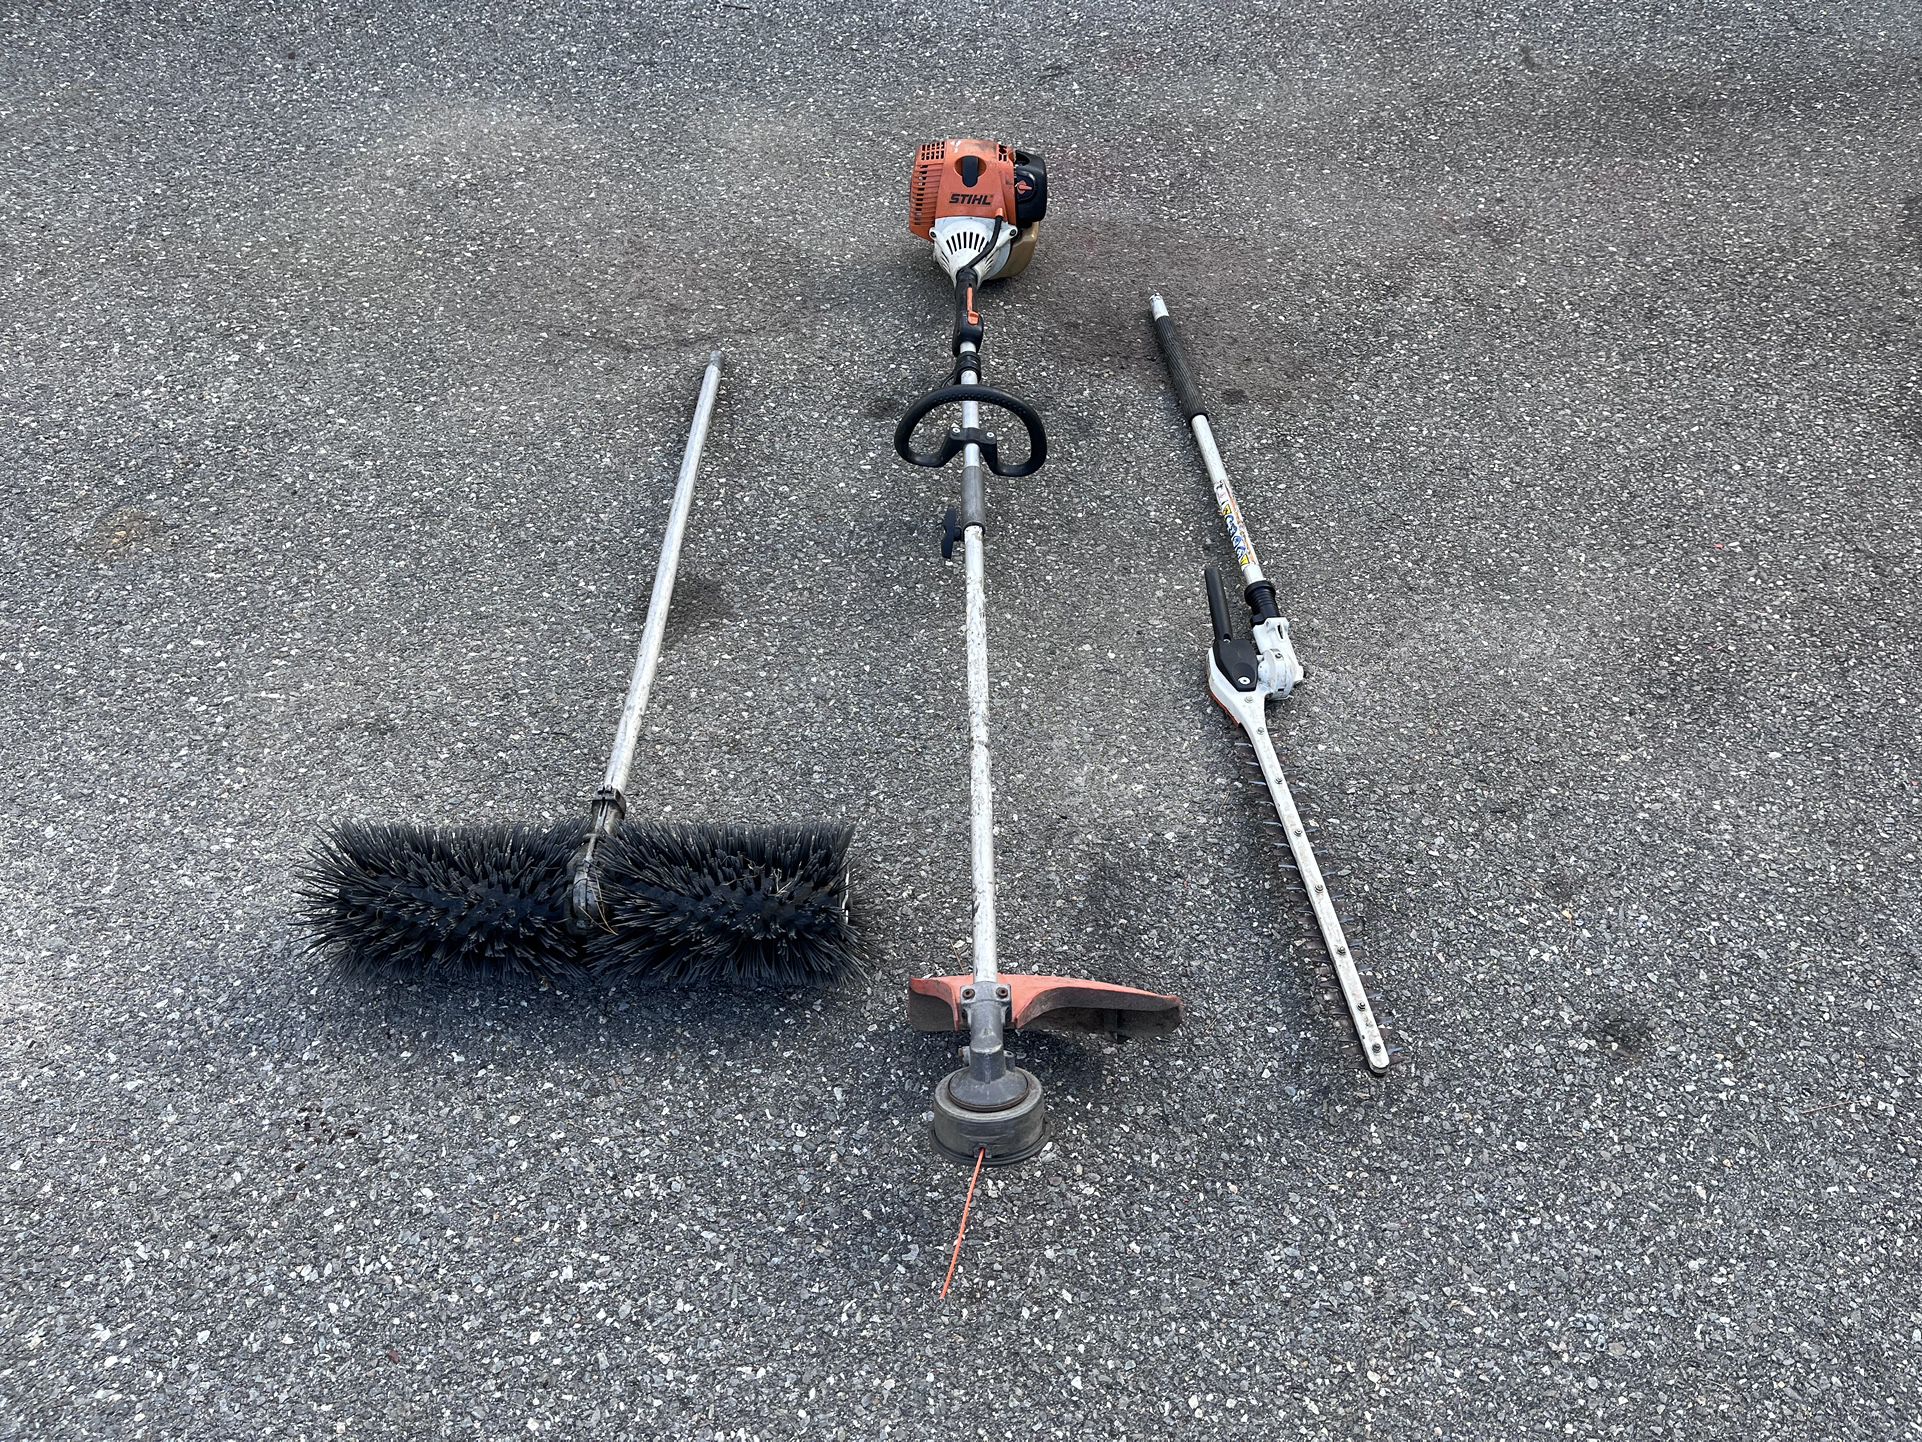 Stihl KM90R  Kumbi system with string, hedger and power broom attachments.